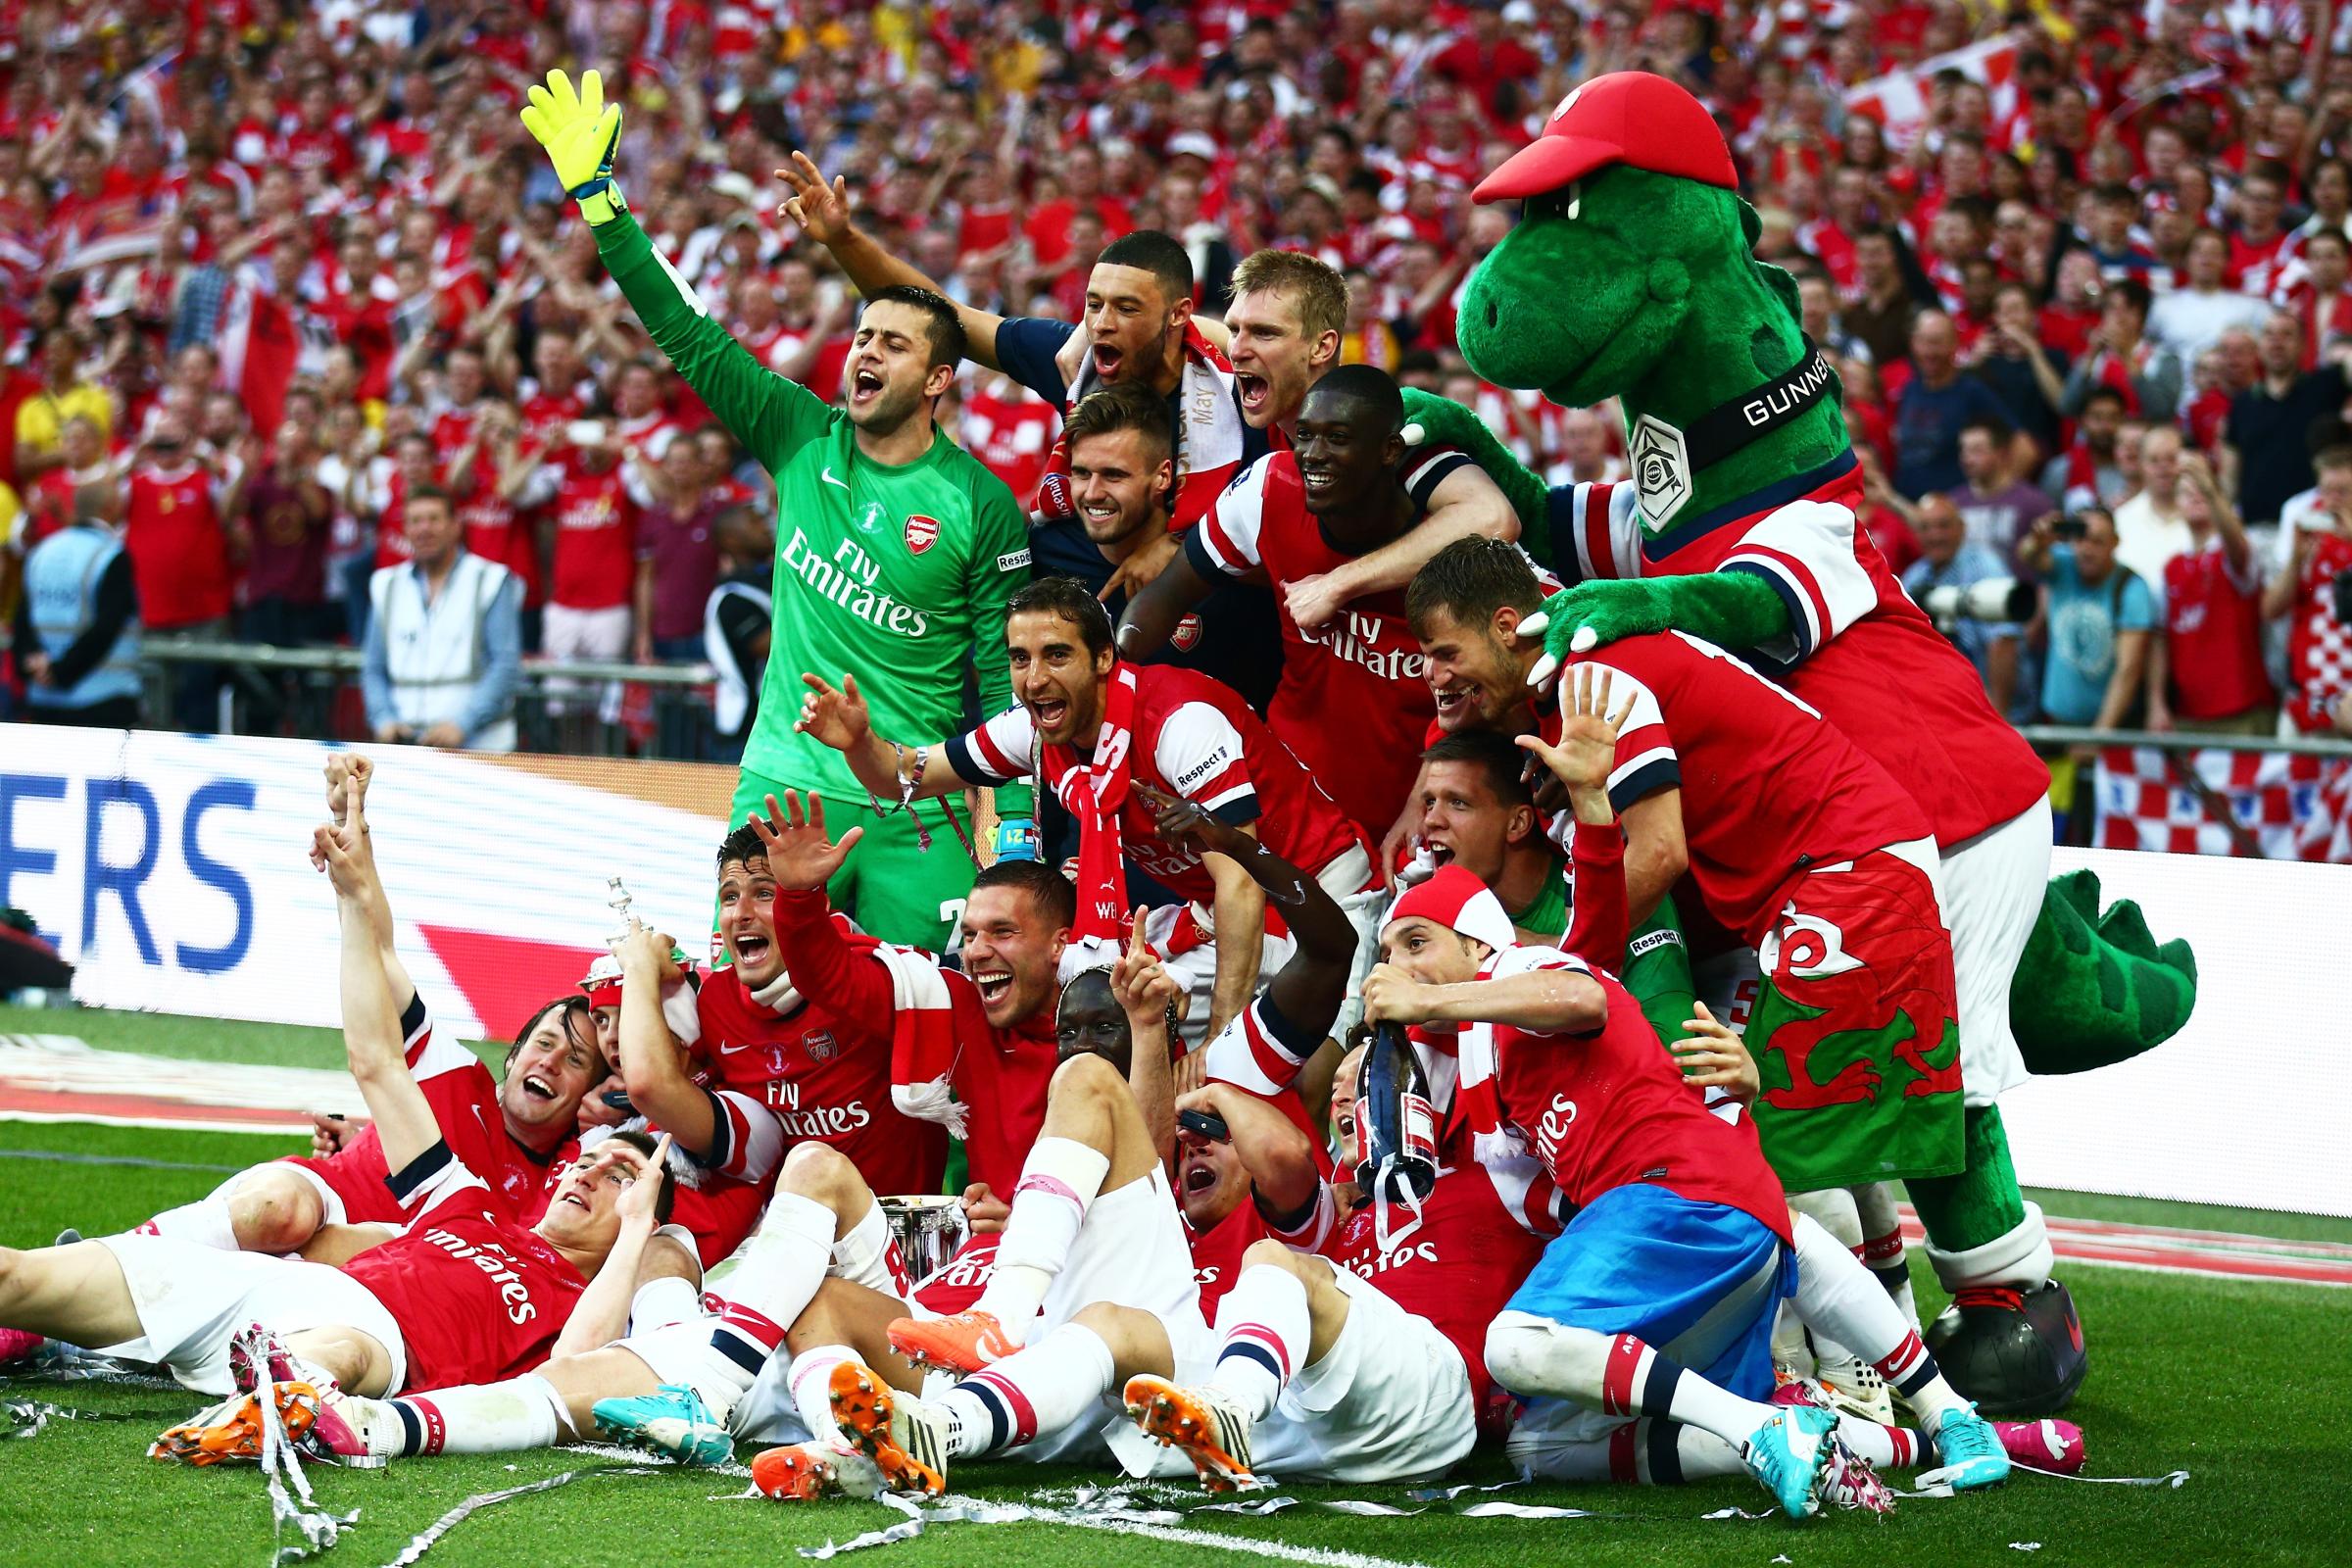 Arsenal players celebrate victory with mascot Gunnersauraus Rex after the FA Cup with Budweiser Final match between Arsenal and Hull City at Wembley Stadium on May 17, 2014 in London.